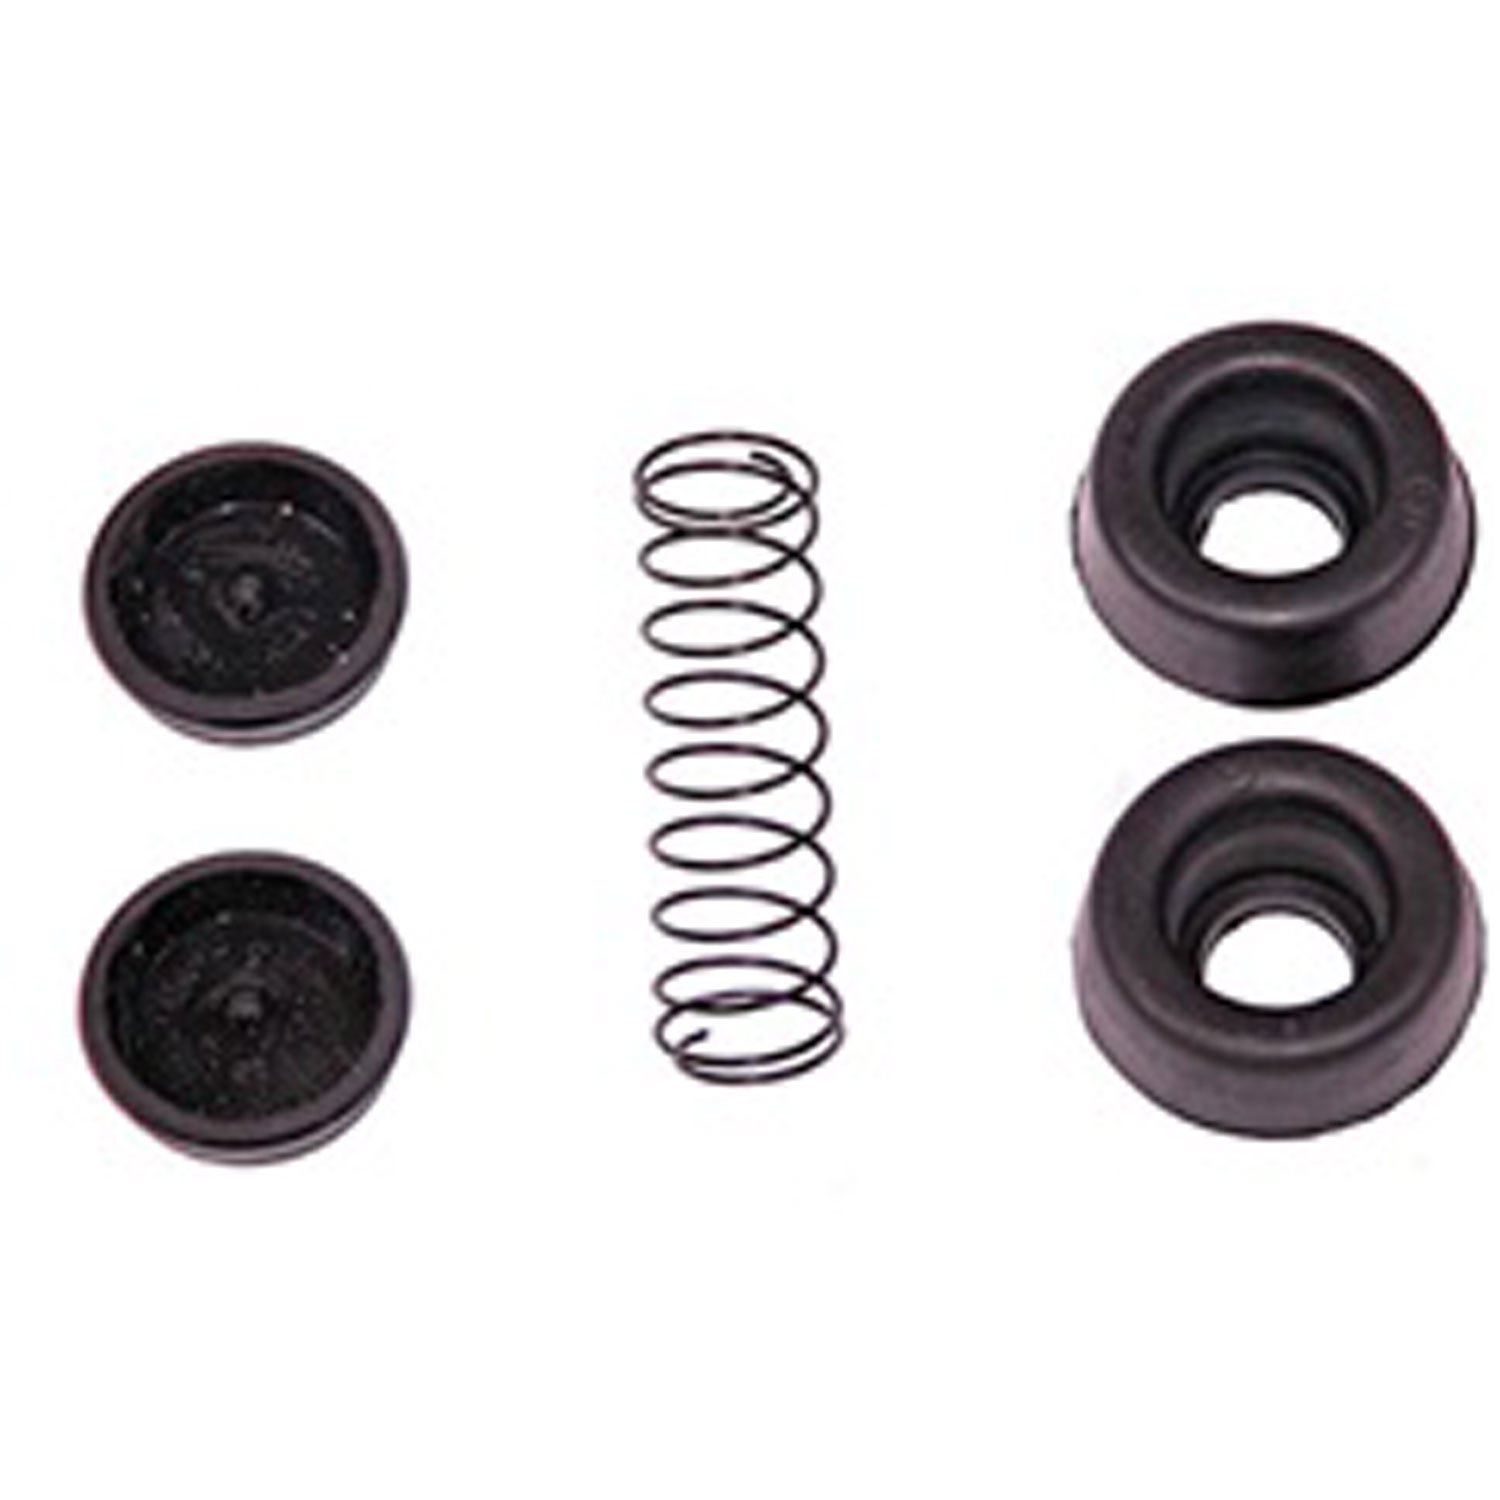 This wheel cylinder repair kit from Omix-ADA allows you to rebuild wheel cylinders with a 13/16 inch bore.